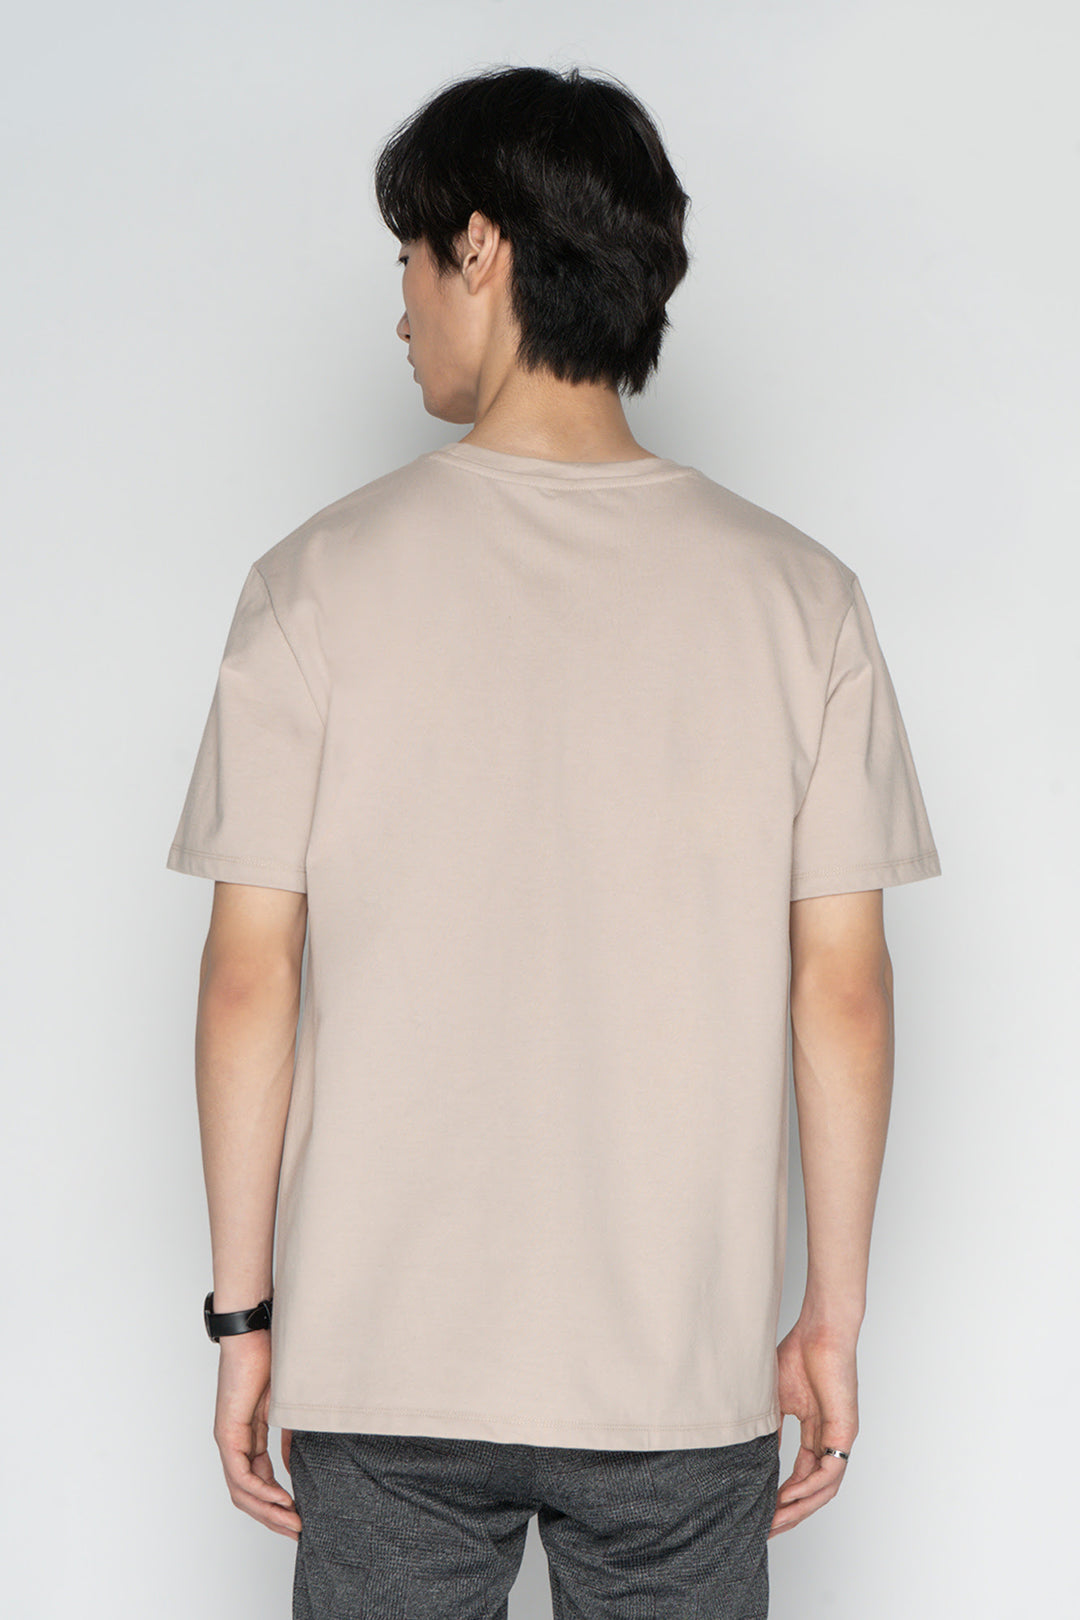 Dress Code Basic Relaxed Fit T-Shirt